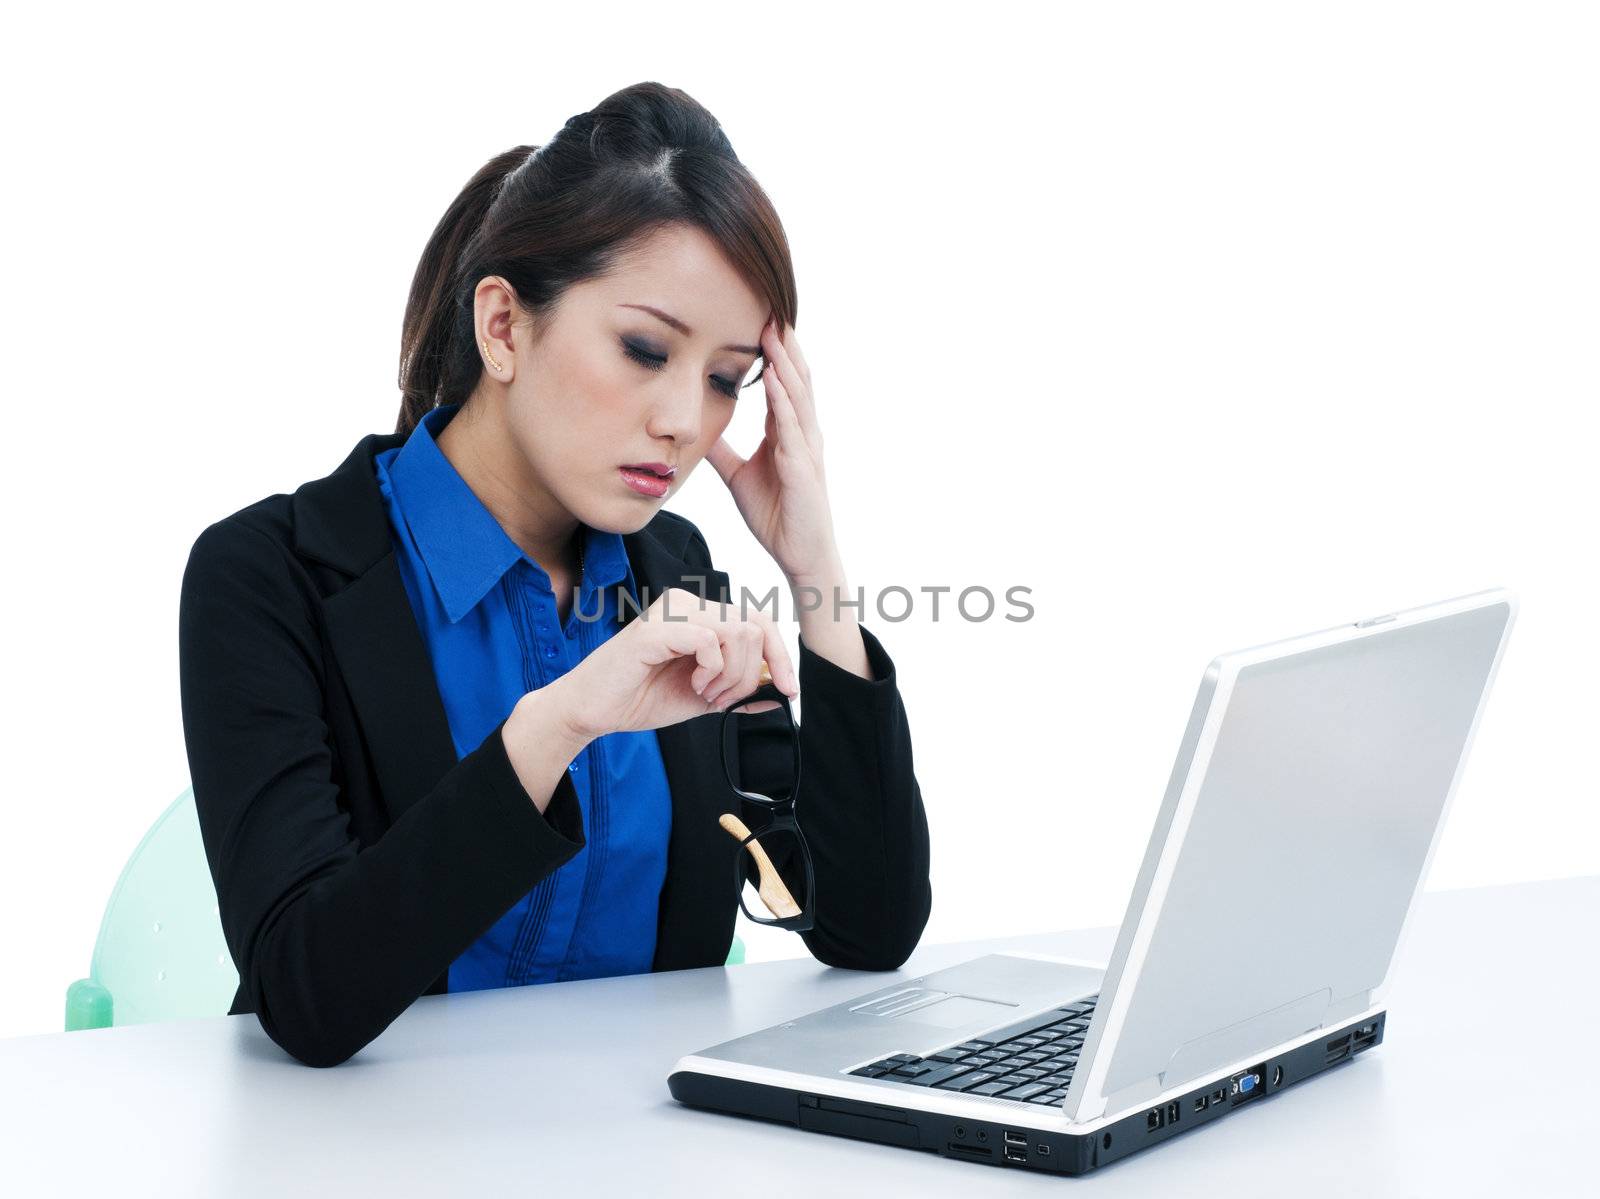 Portrait of a tired young businesswoman with laptop and her hand on head over white background.